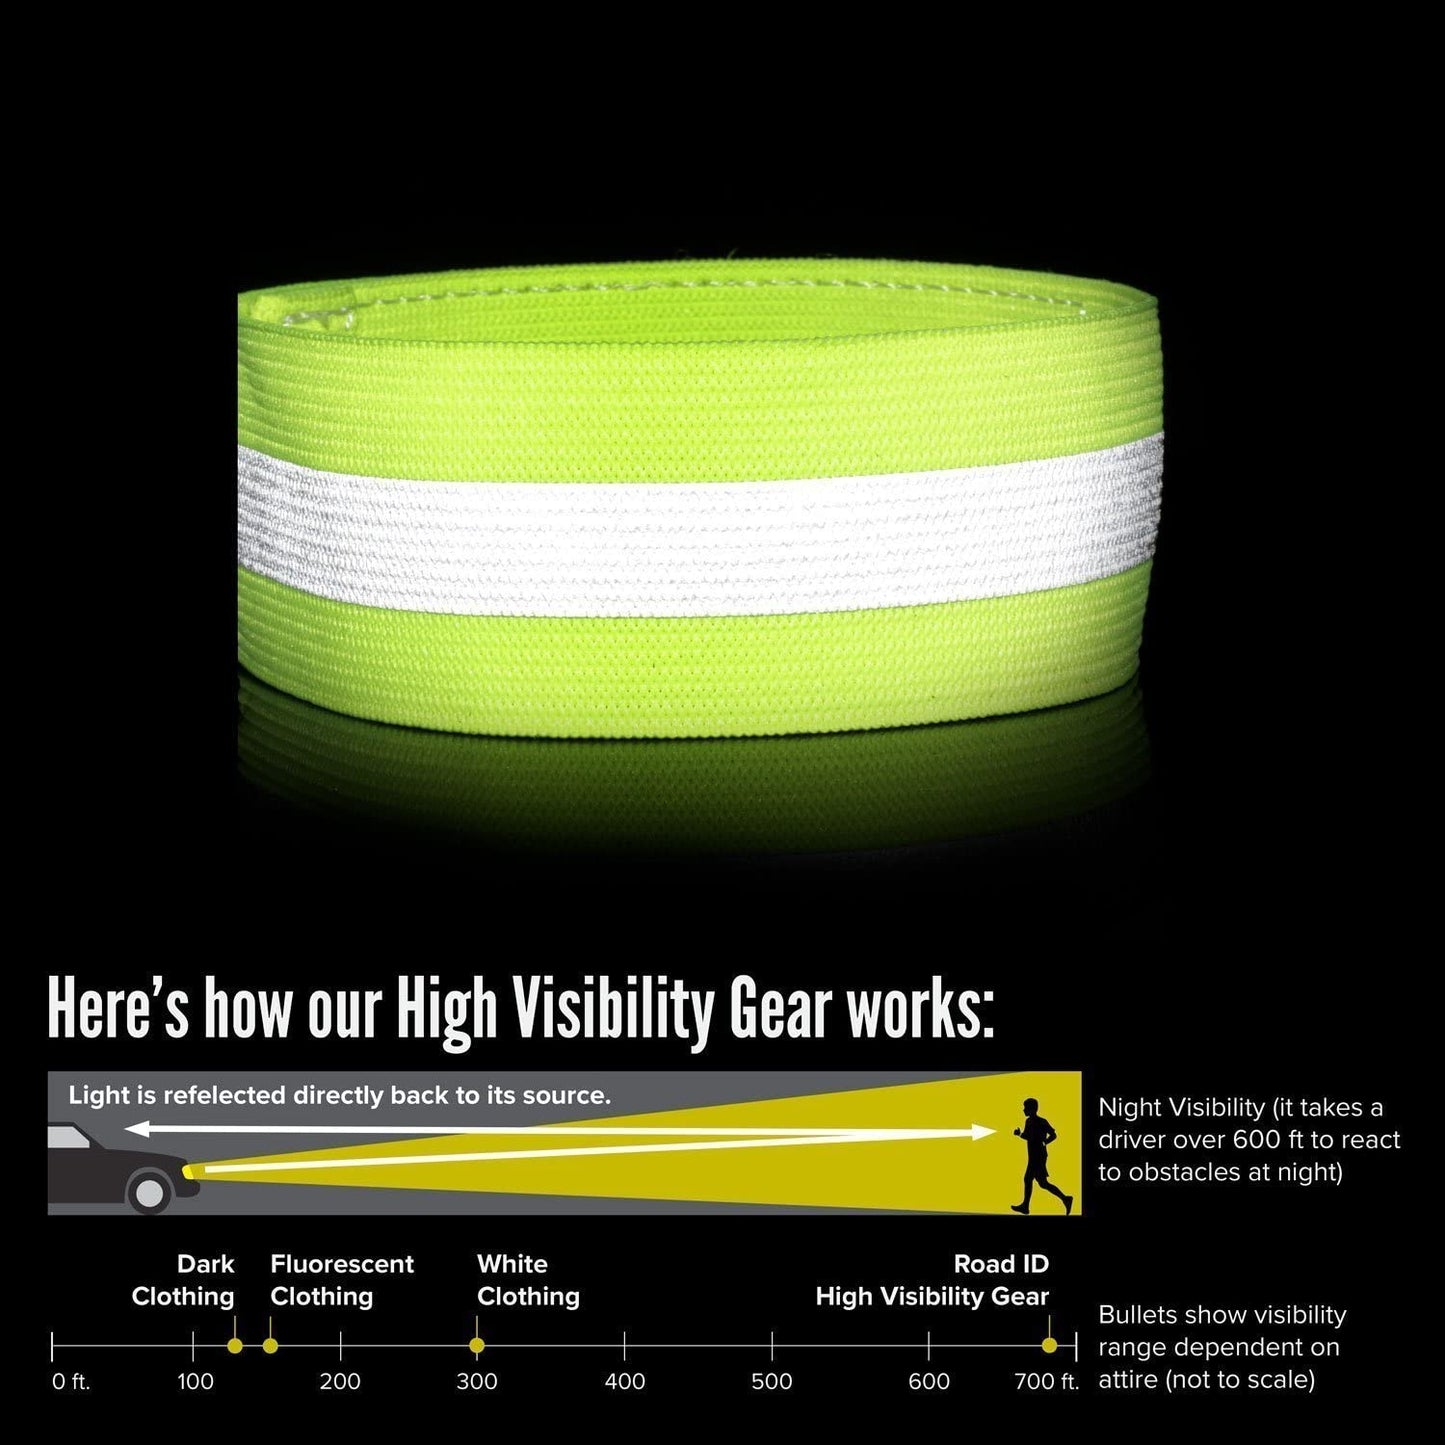 Reflective Bands for Wrist / Ankle - Safety Reflector Straps, High Visibility over 700 ft - Night Safety for Walking, Running, Jogging, Cycling, or Hiking- Fits over Clothing, Jacket, or Pants- 2 Pack - (For 12 piece(s))